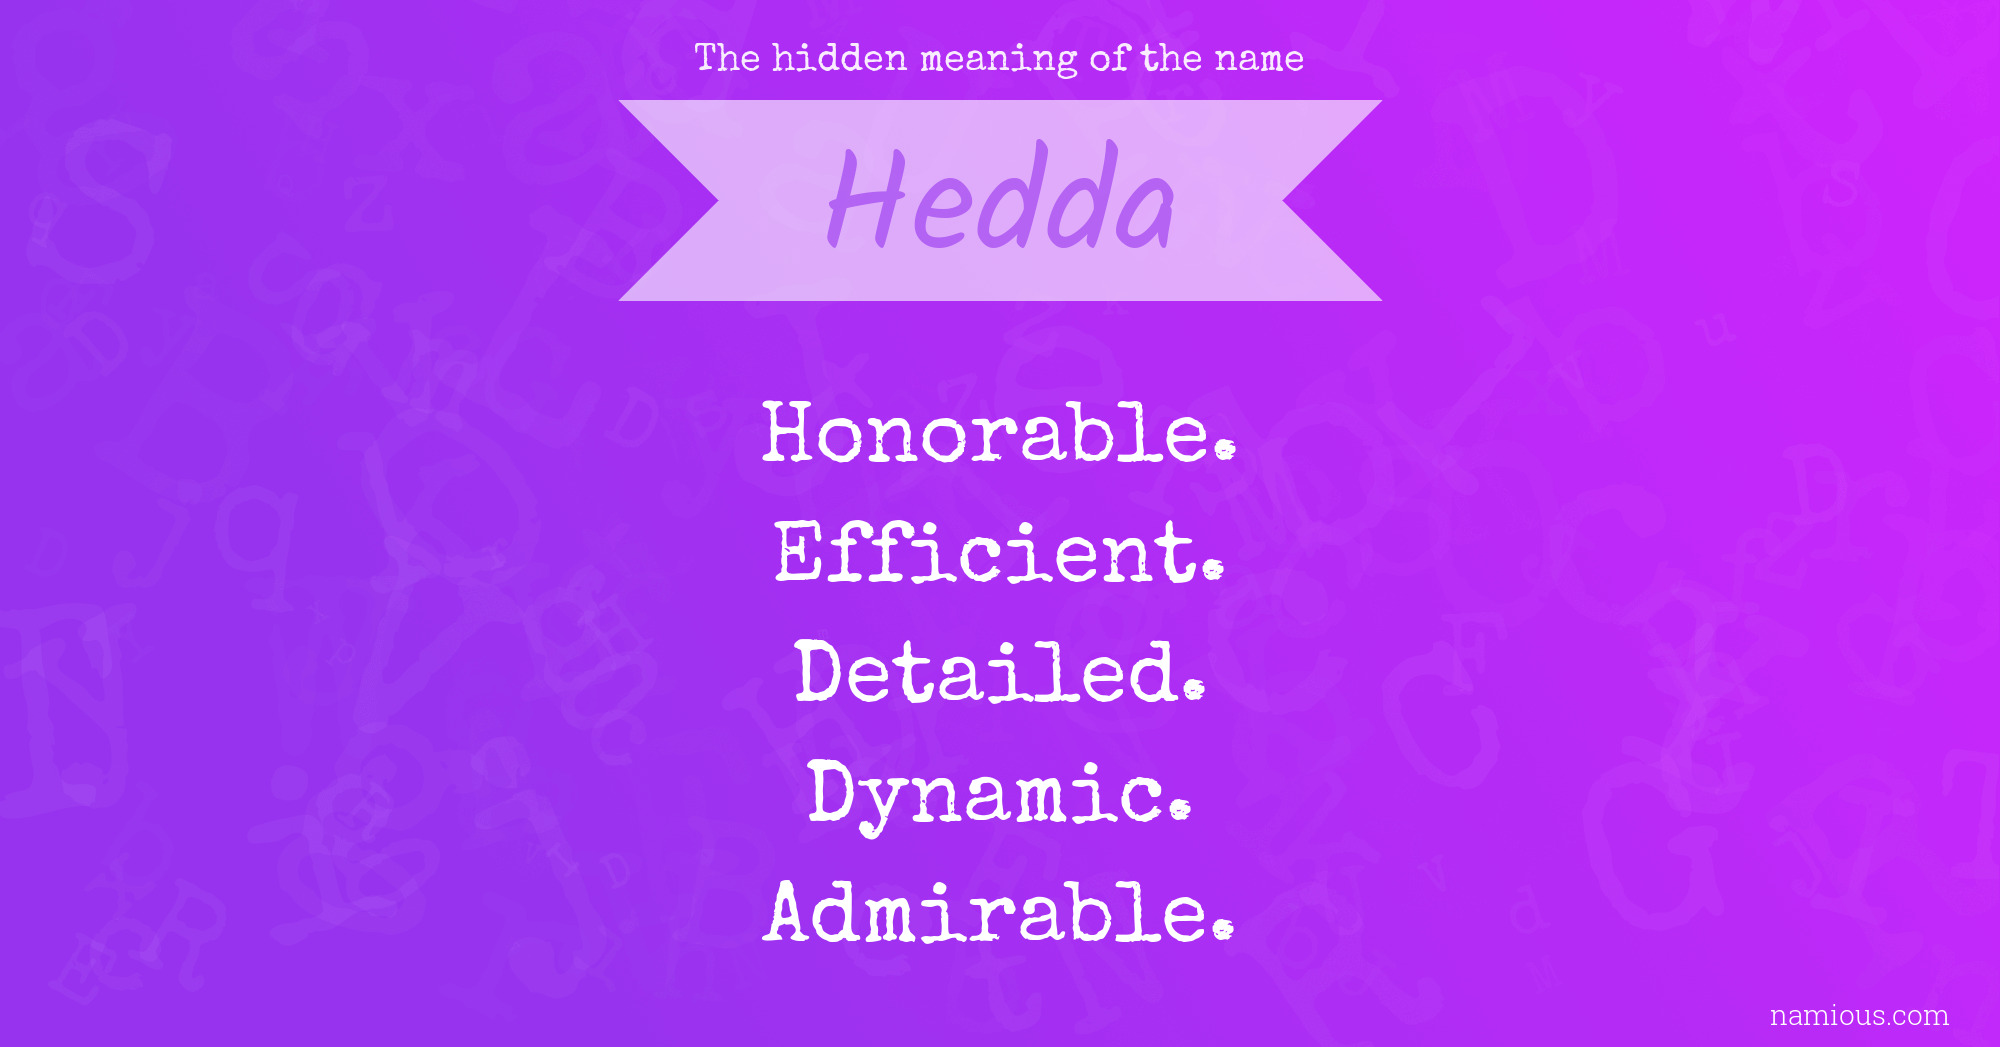 The hidden meaning of the name Hedda